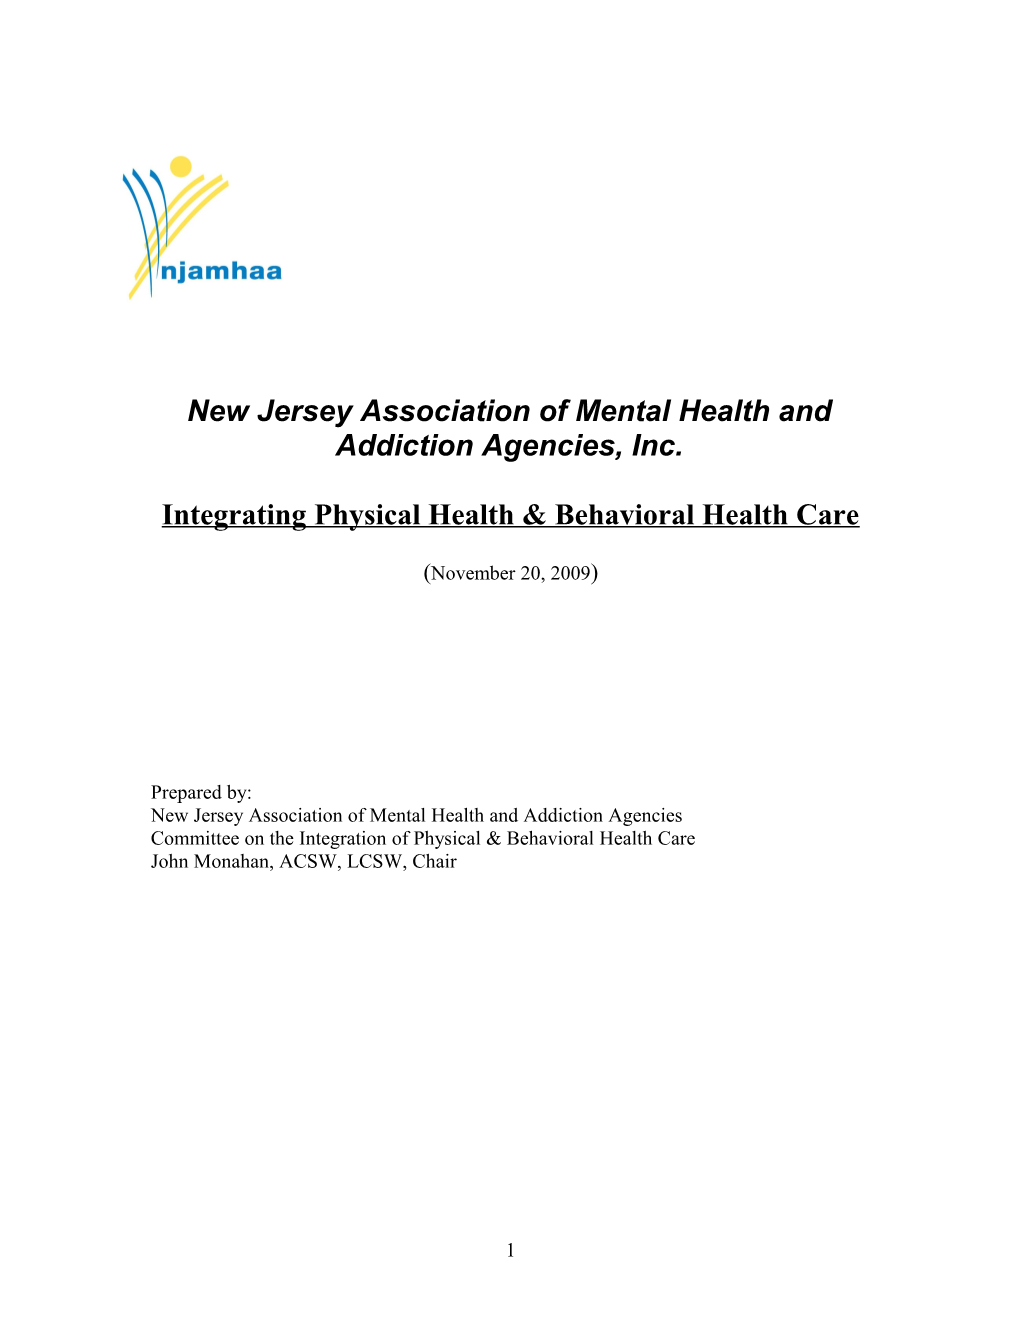 New Jersey Association of Mental Health and Addiction Agencies, Inc